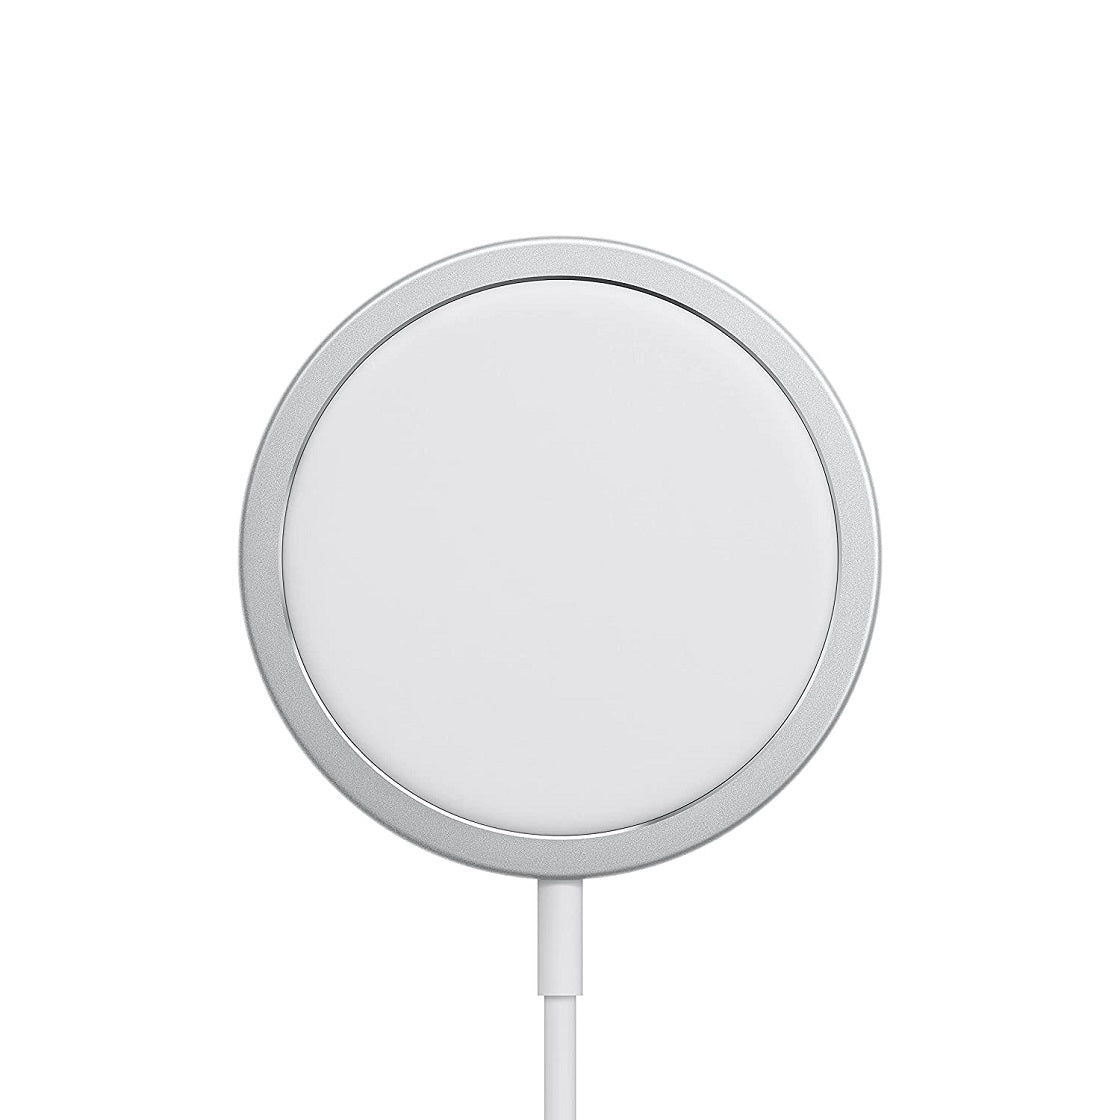 iphone 12 MagSafe Wireless Fast Charging Charger (White)